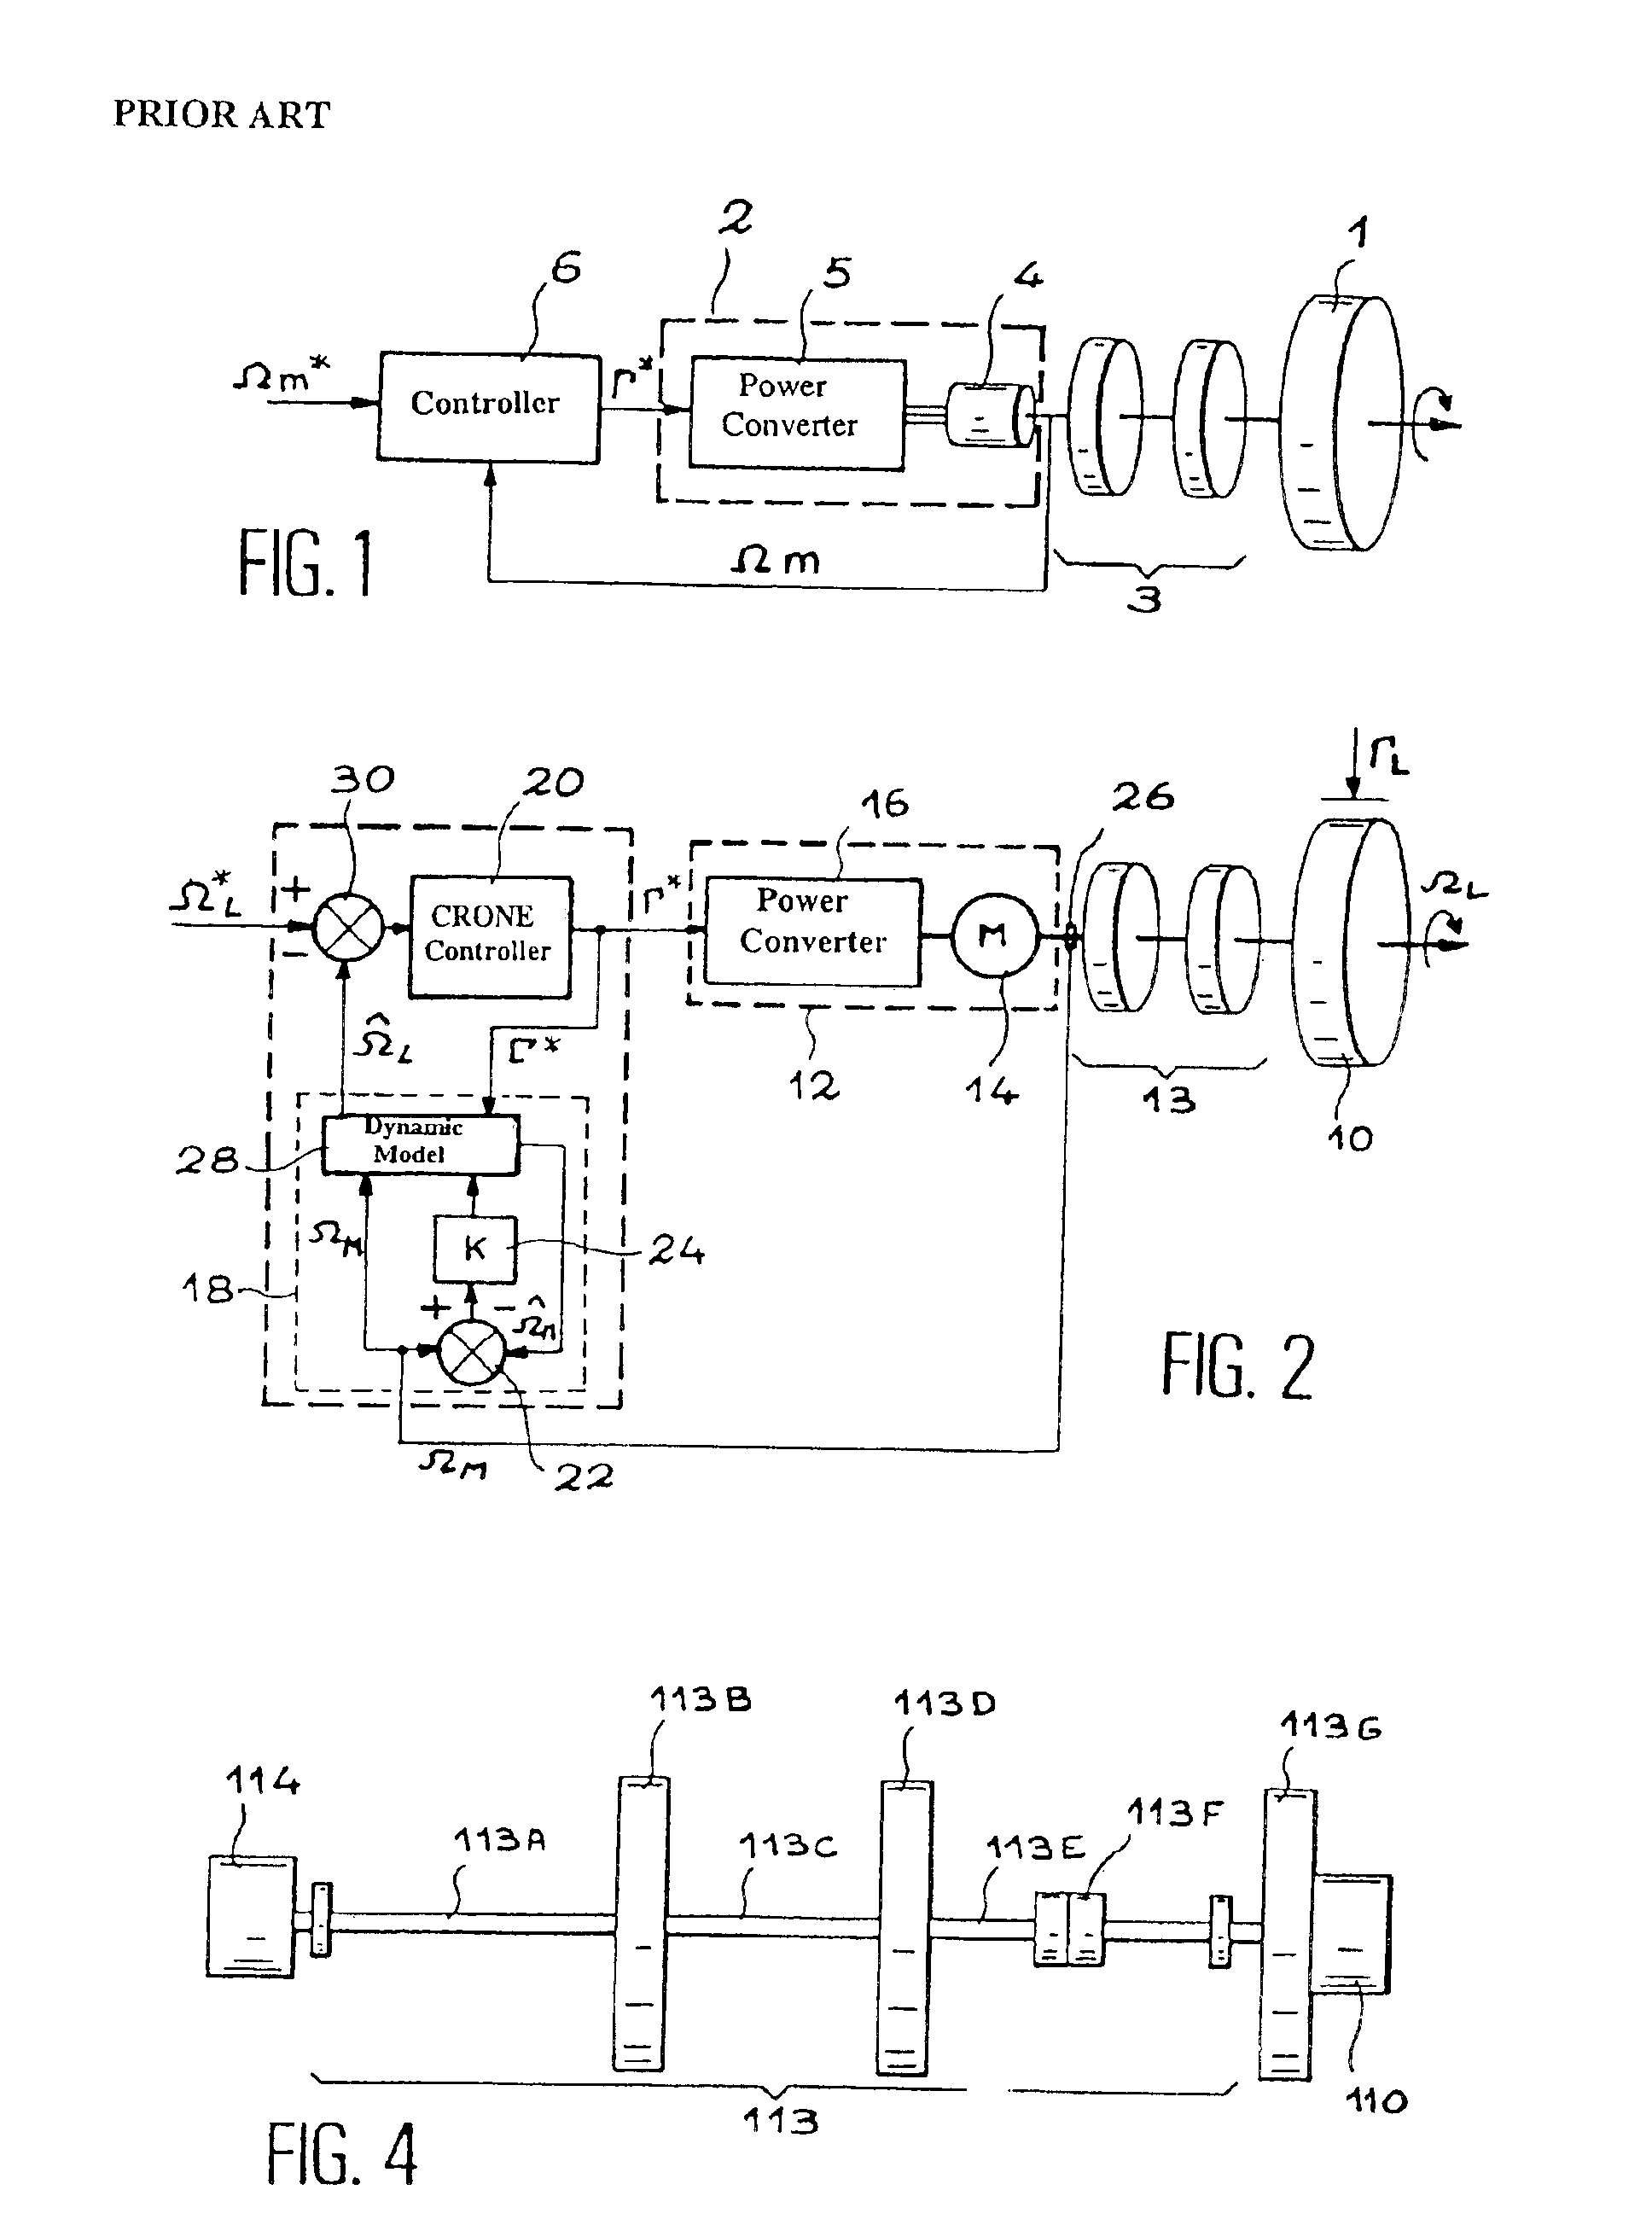 Method and device for controlling angular speed of an electromechanical drive train with little damping